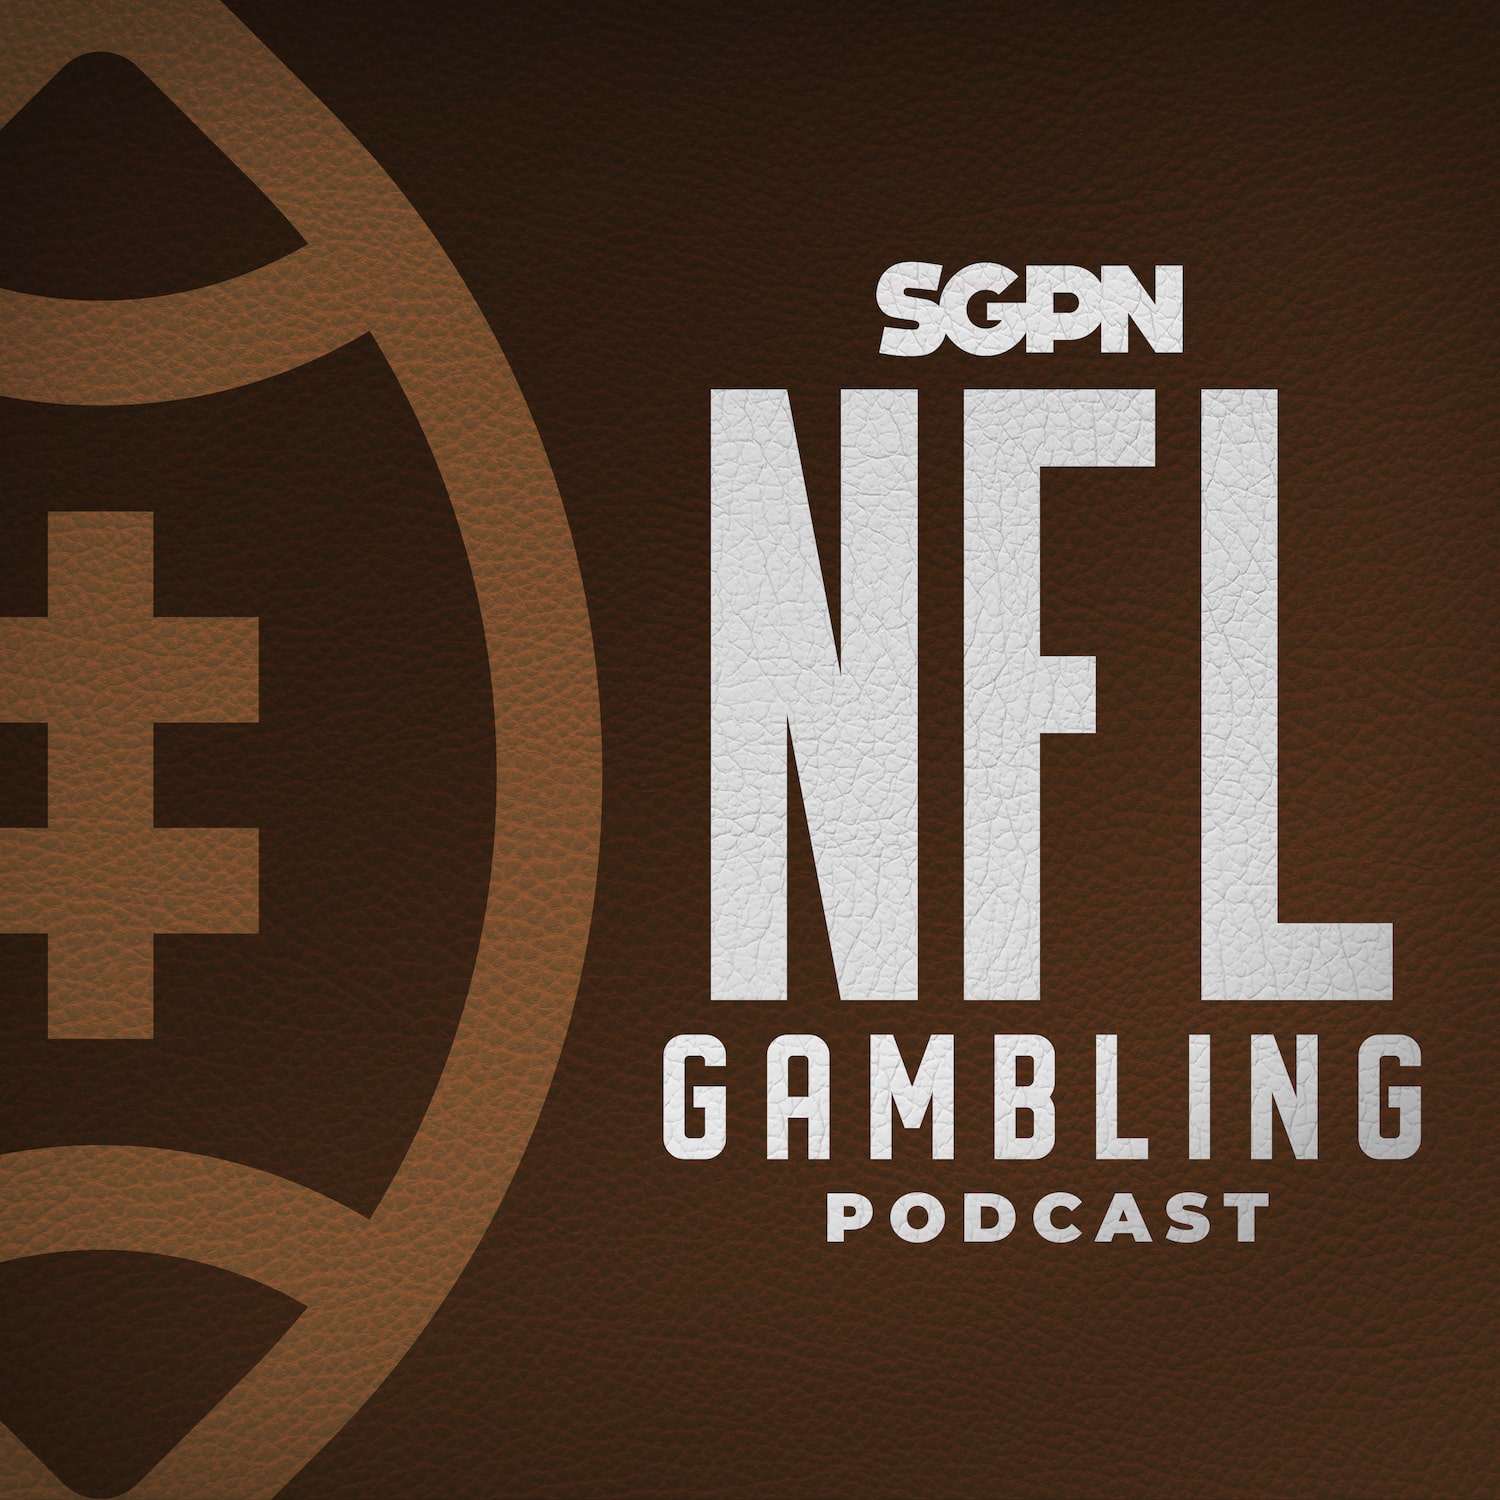 Photo: nfl betting podcast